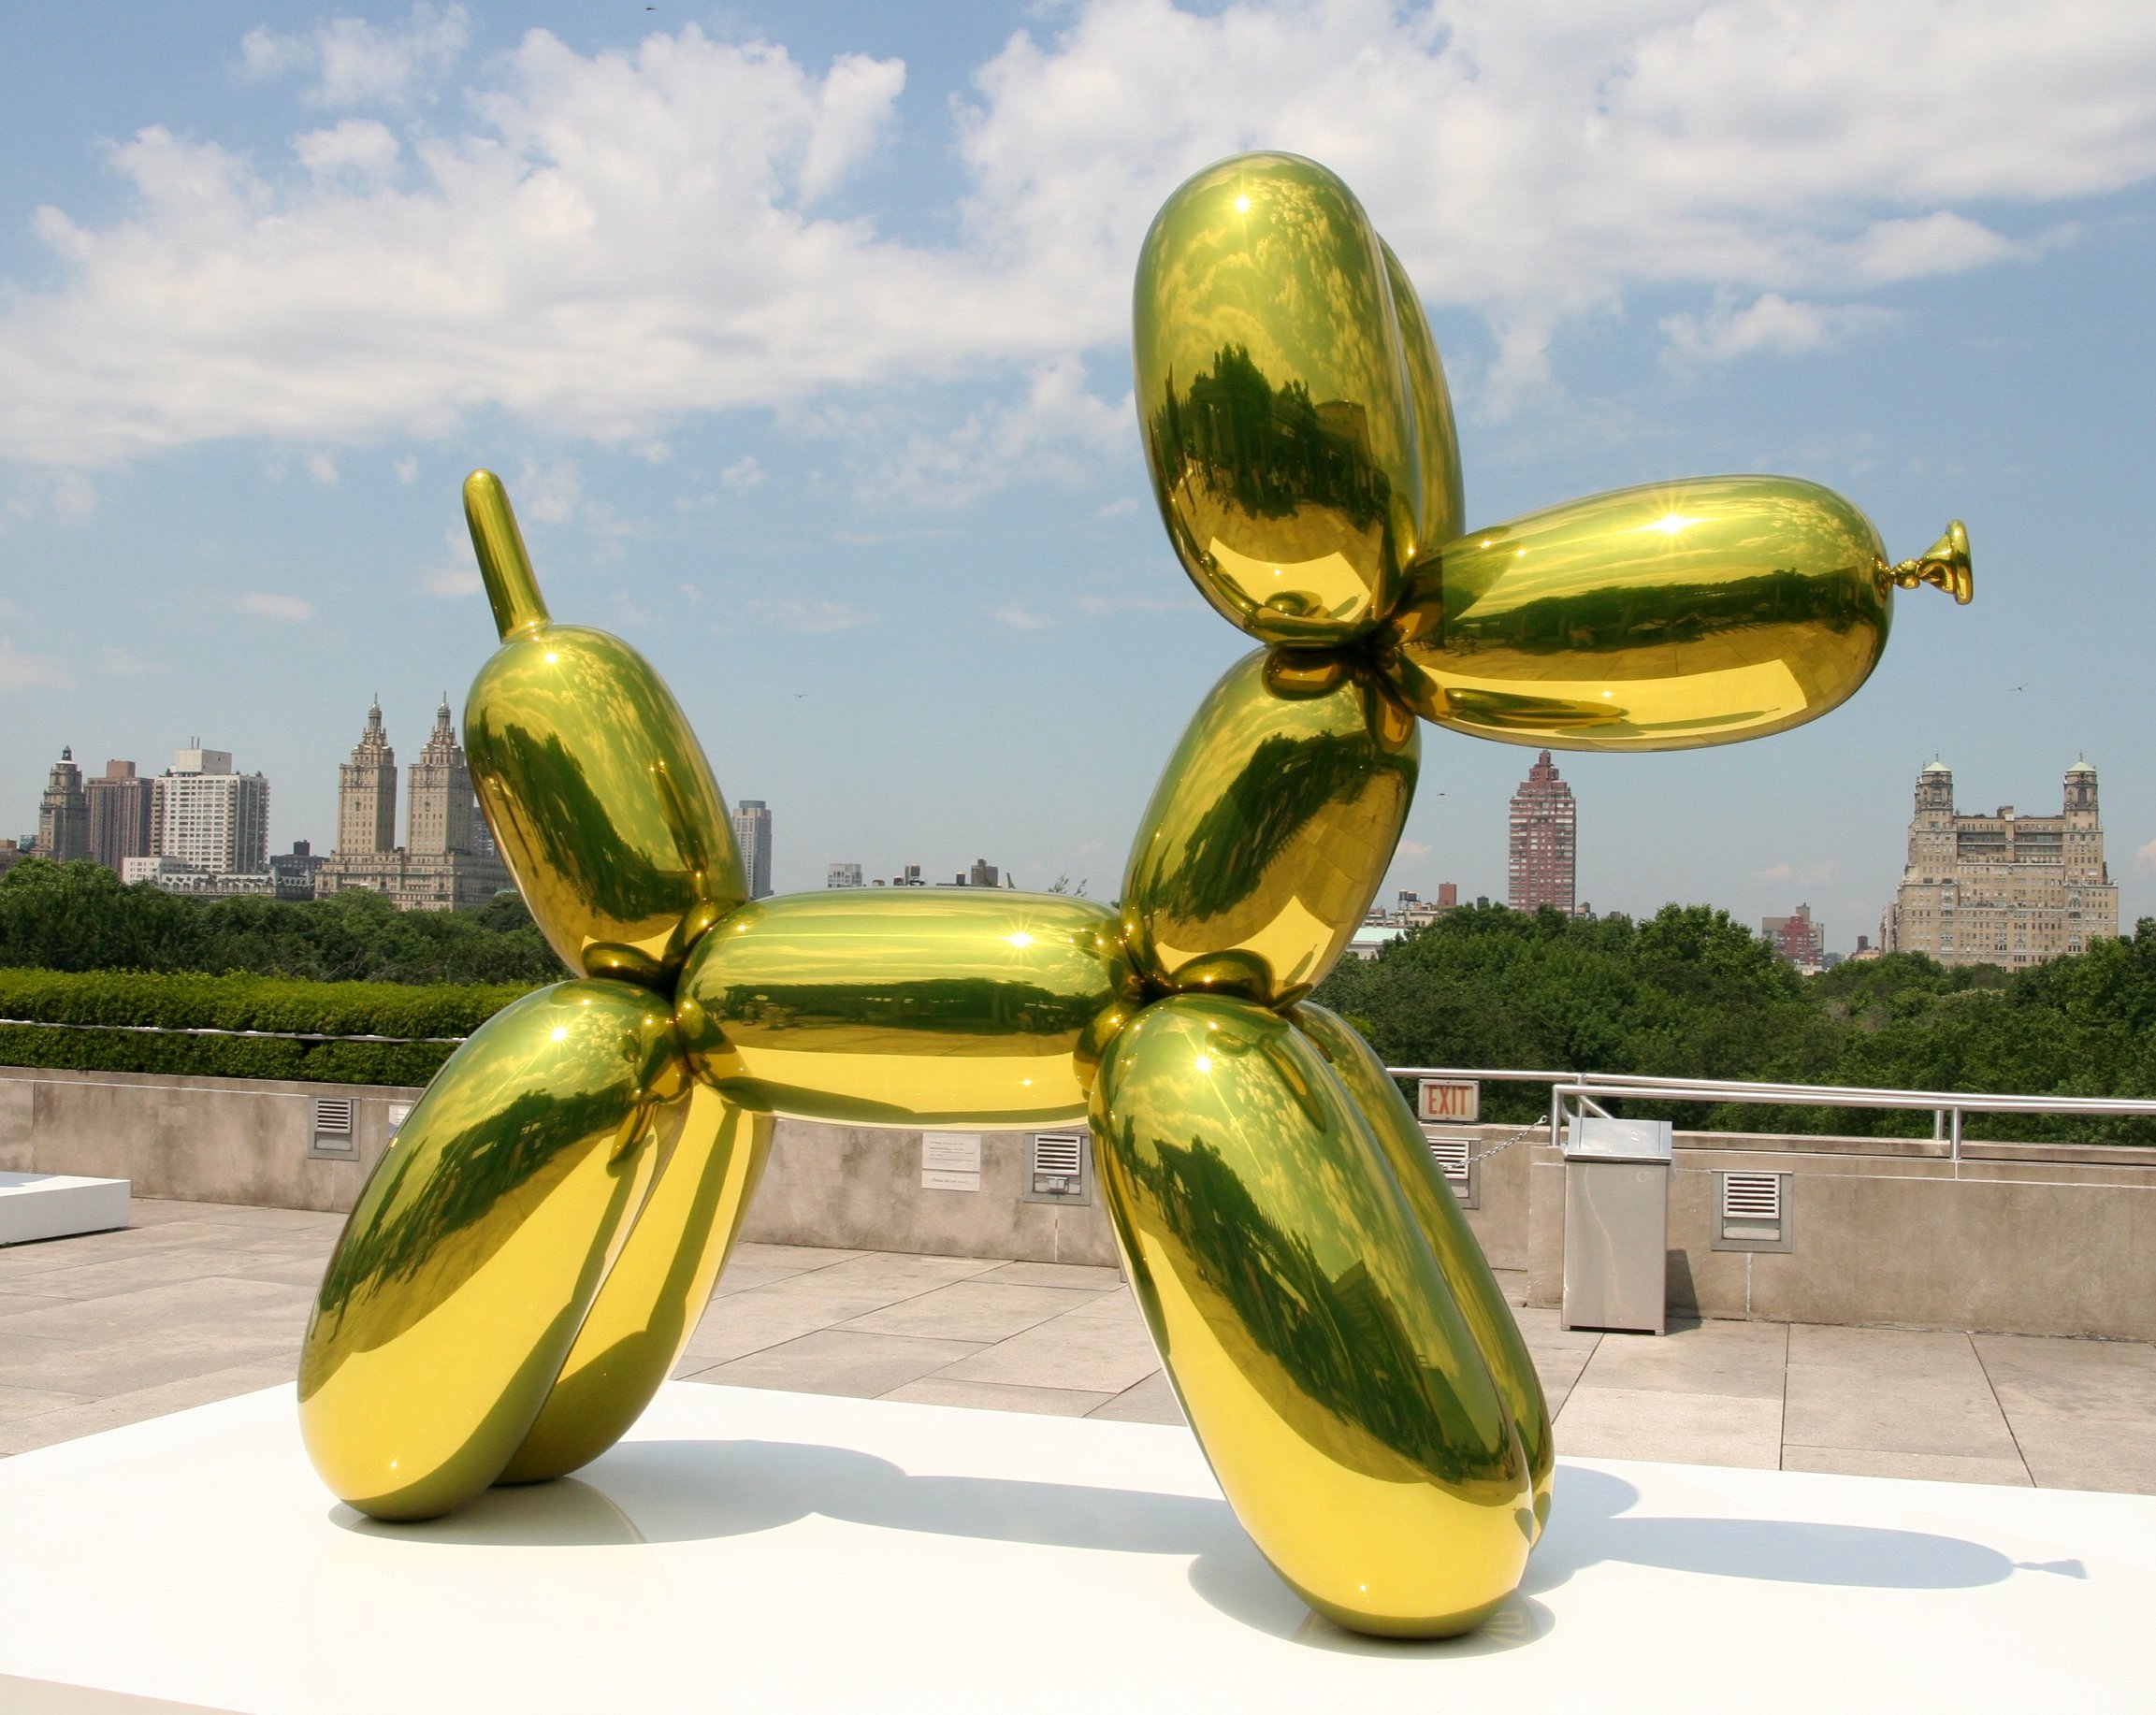 Jeff Koons, Balloon Dog: installation view with silver balloon, 1994-2001, transparent color coating, stainless steel, 320 x 380 x 120 cm (photo: Kim, © Jeff Koons)